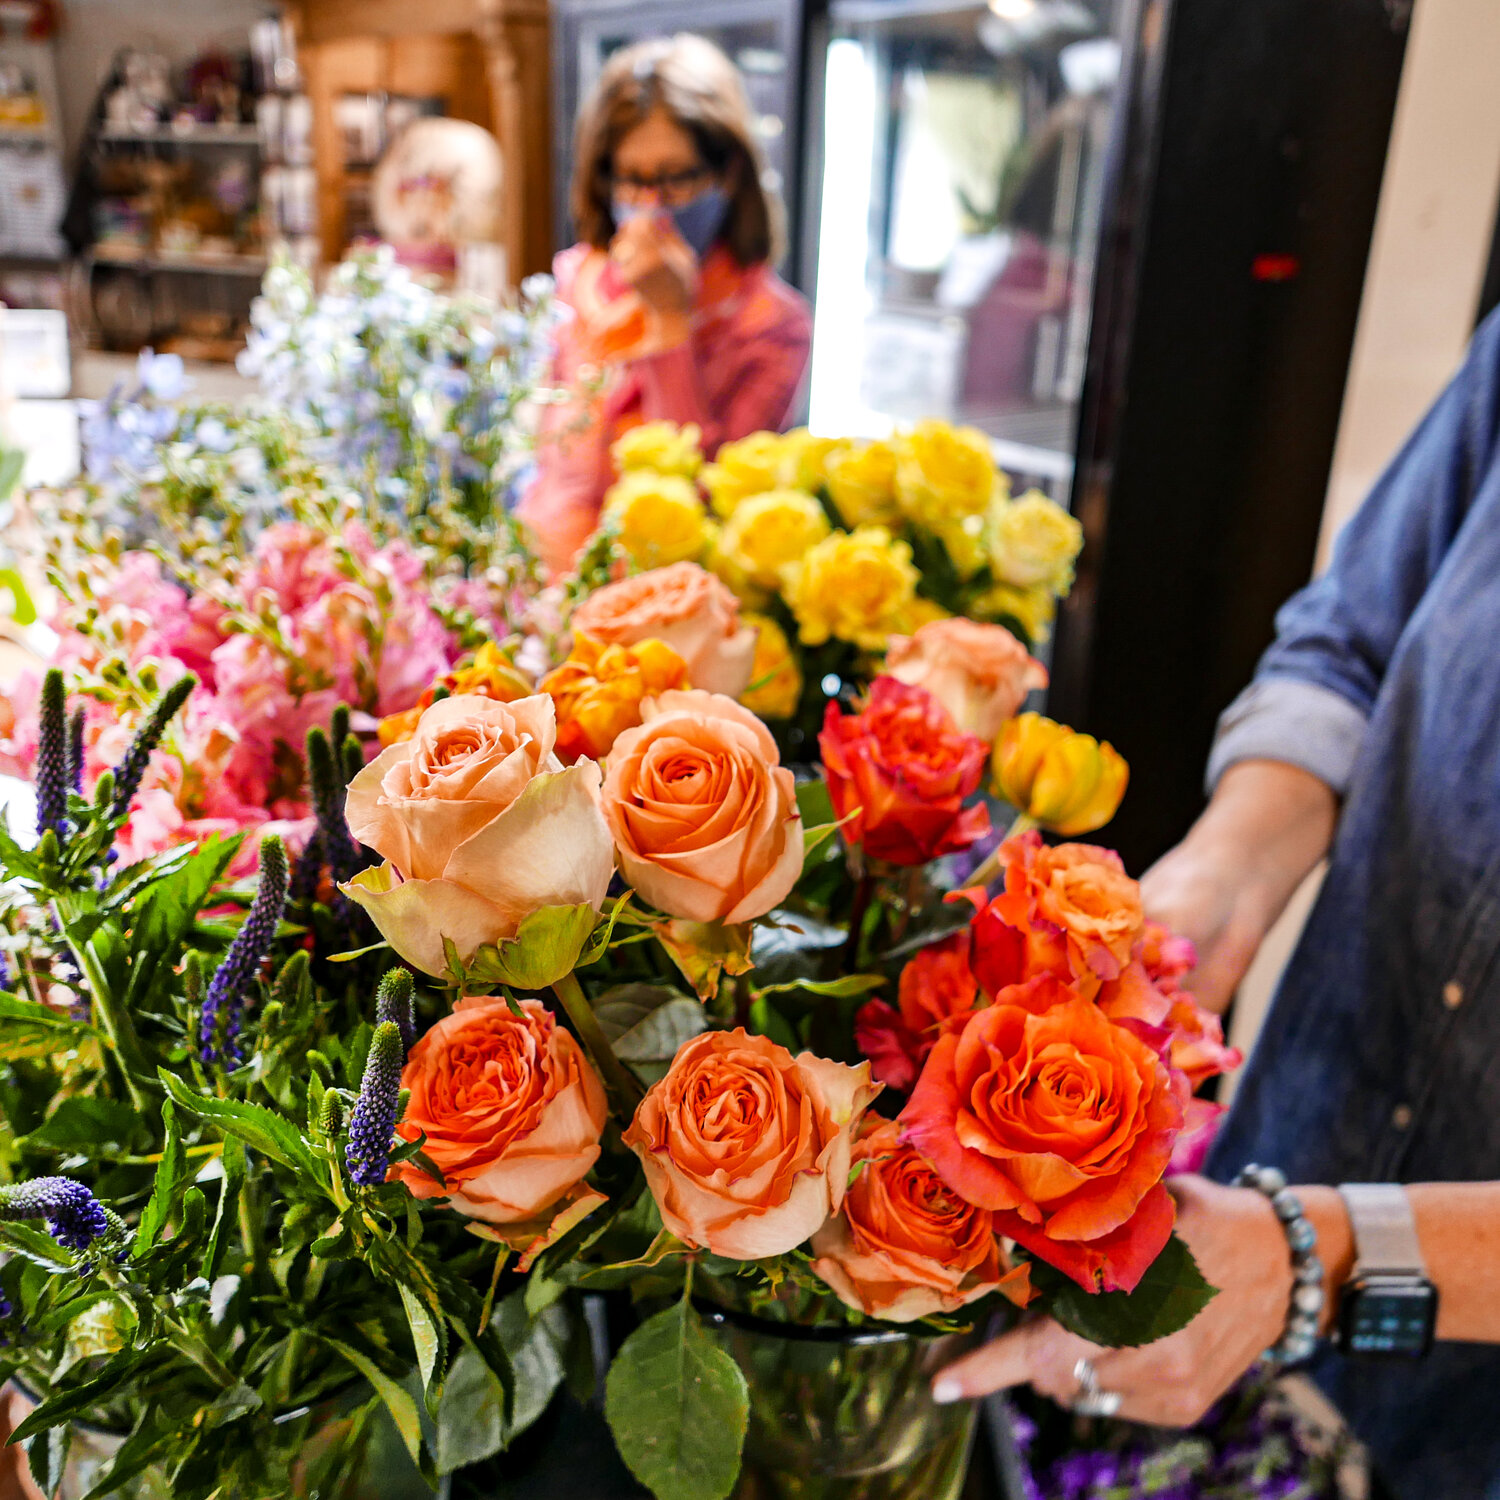 Colleen Malik and Karen Juel Hatch prepare fresh cut flowers at Chapman’s Greenhouse in Beverly Farms.  This time of year, the shop gets flower deliveries every day, and this one was all local, with bright, fluffy orange tulips from Groveland, Massachusetts in front.  This is a busy season for the team at Chapman’s, with gardeners racing to prep their outdoor spaces for planting and—as seen here—preparations for Mother’s Day gifting at a peak.